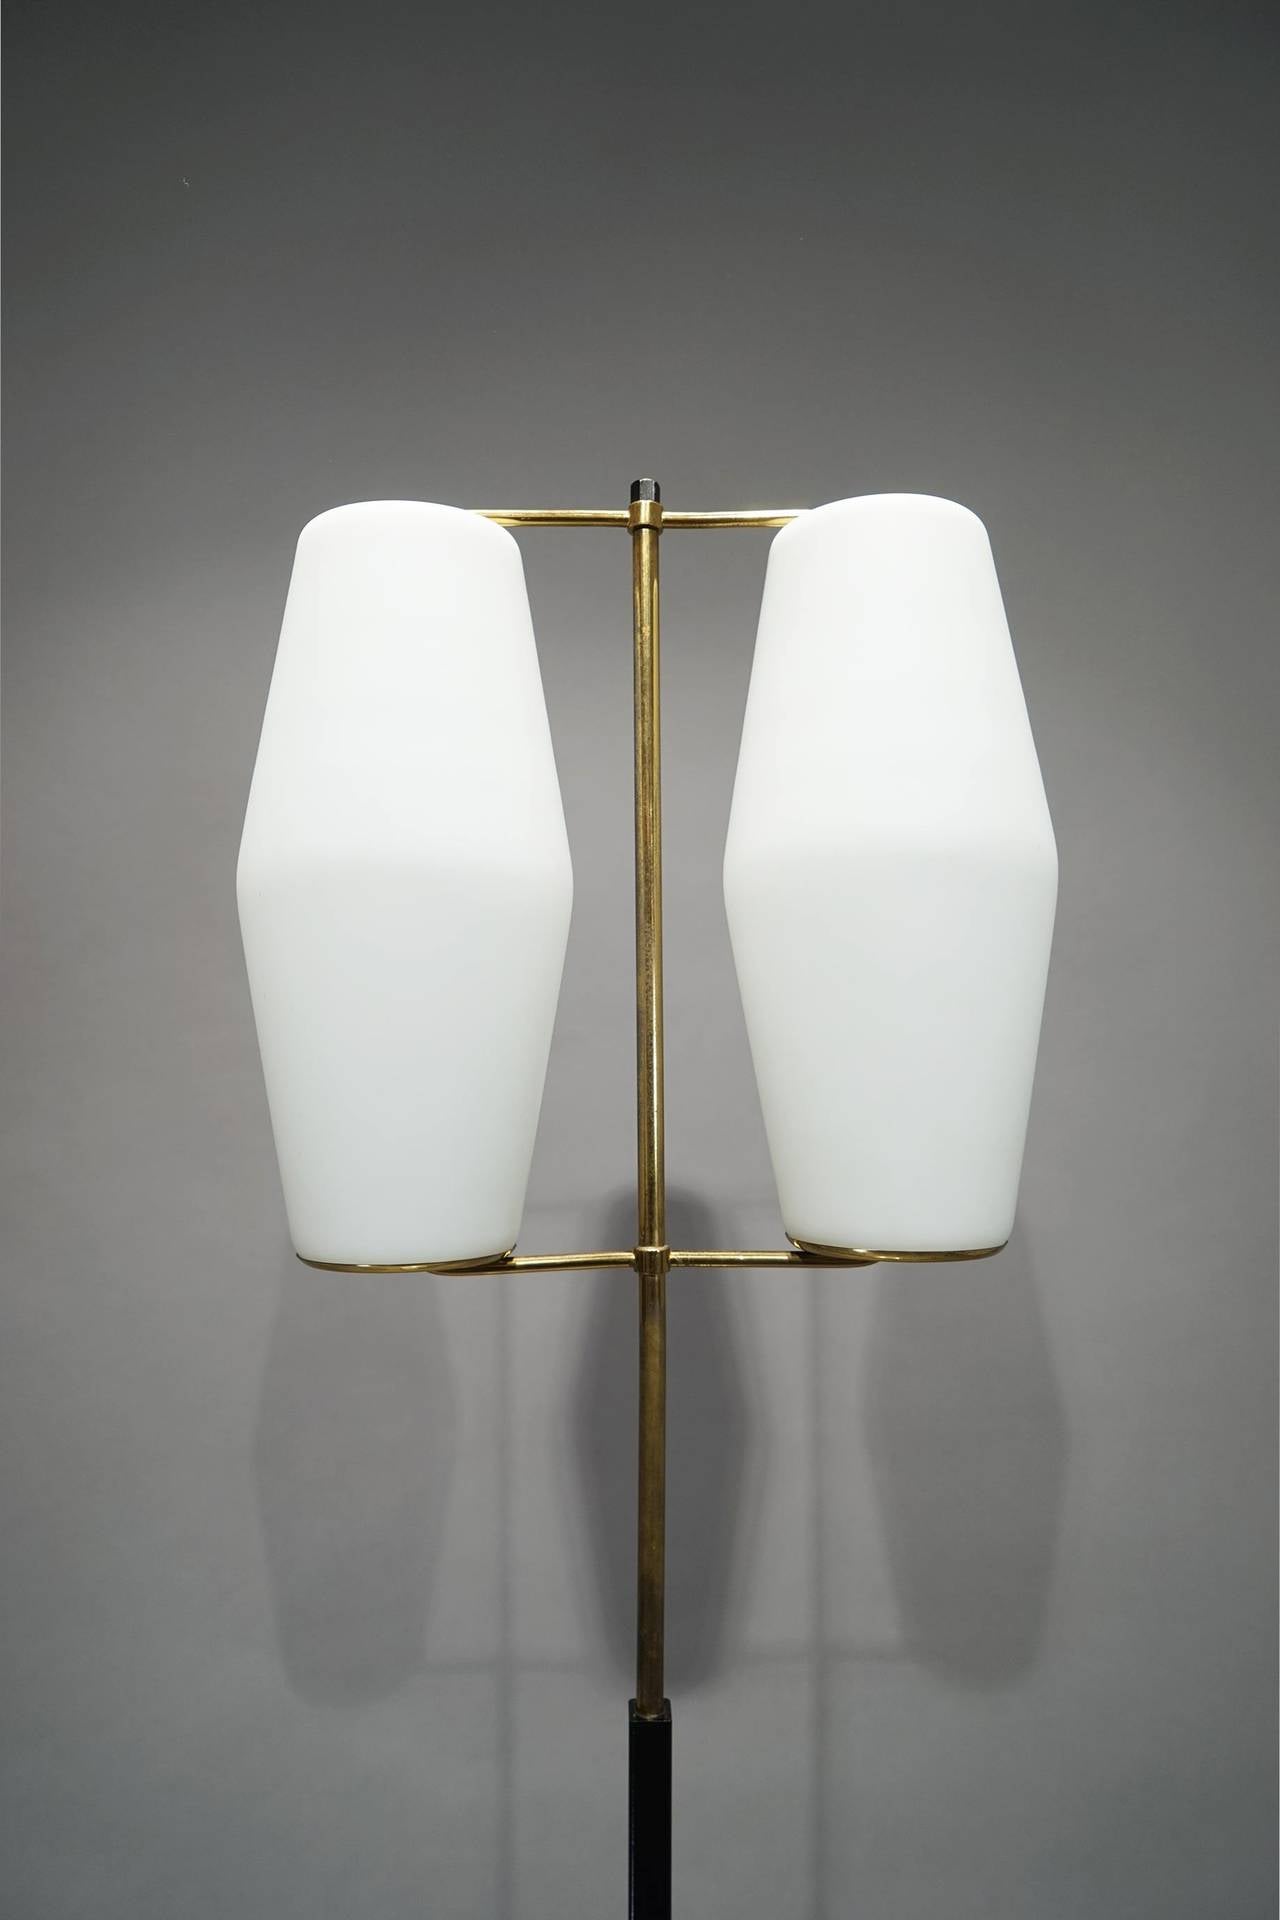 Floor Lamp by Stilnovo, Italy ca.1950

Label at the inside